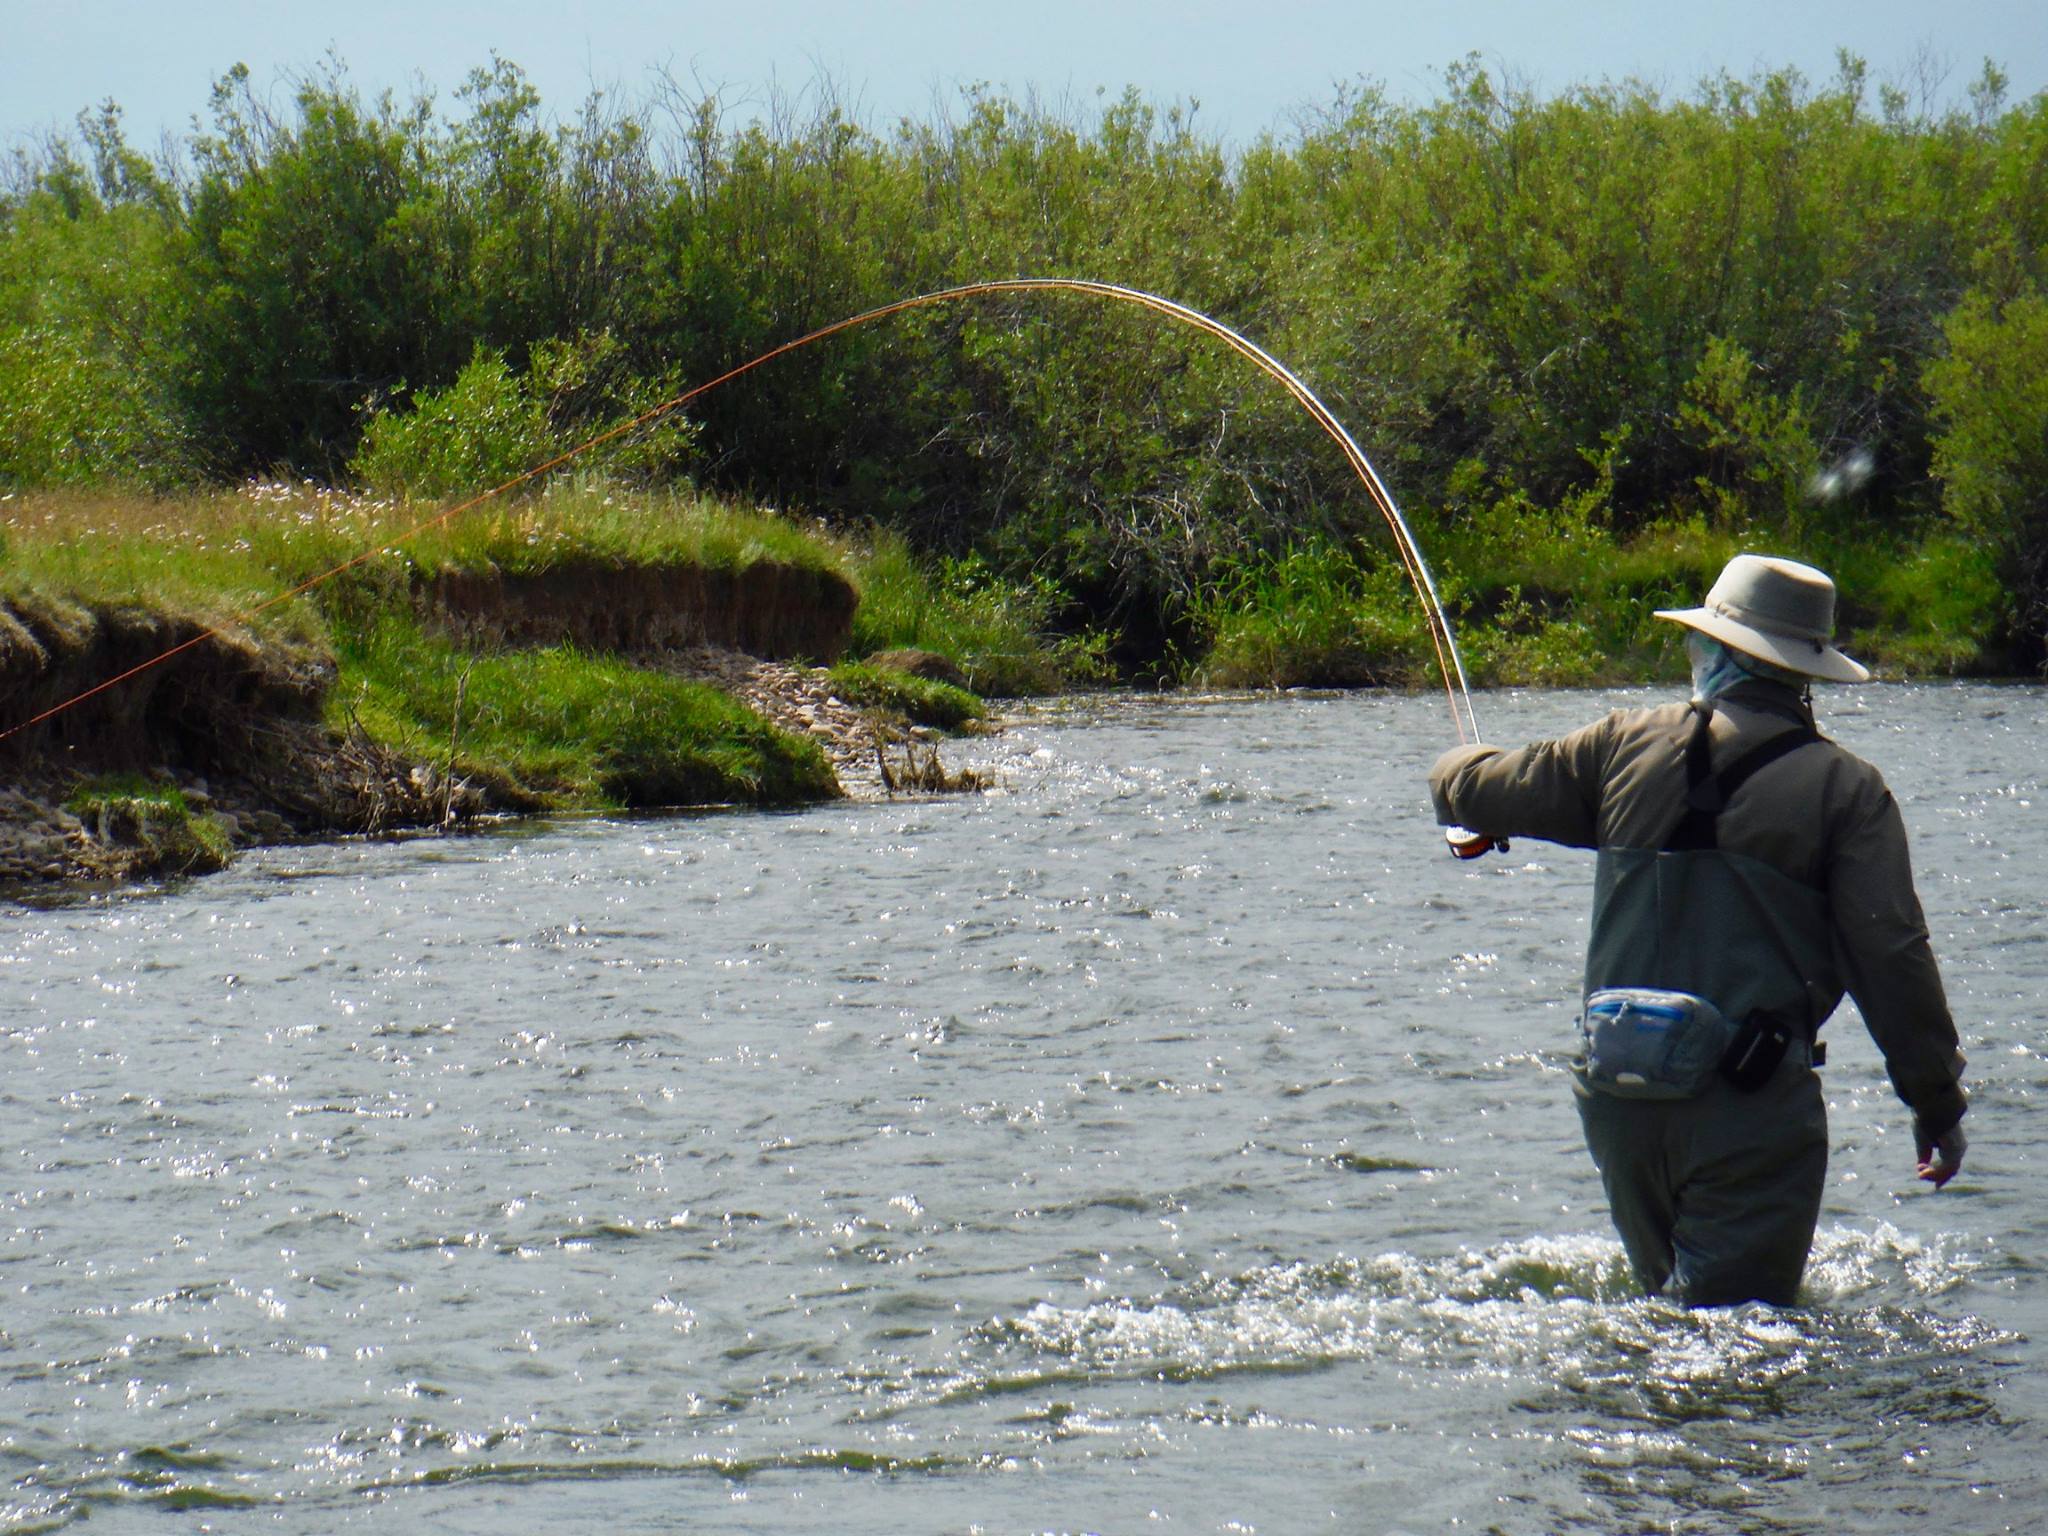 The Benefits of Fly Fishing for Mental Health and Well-being.